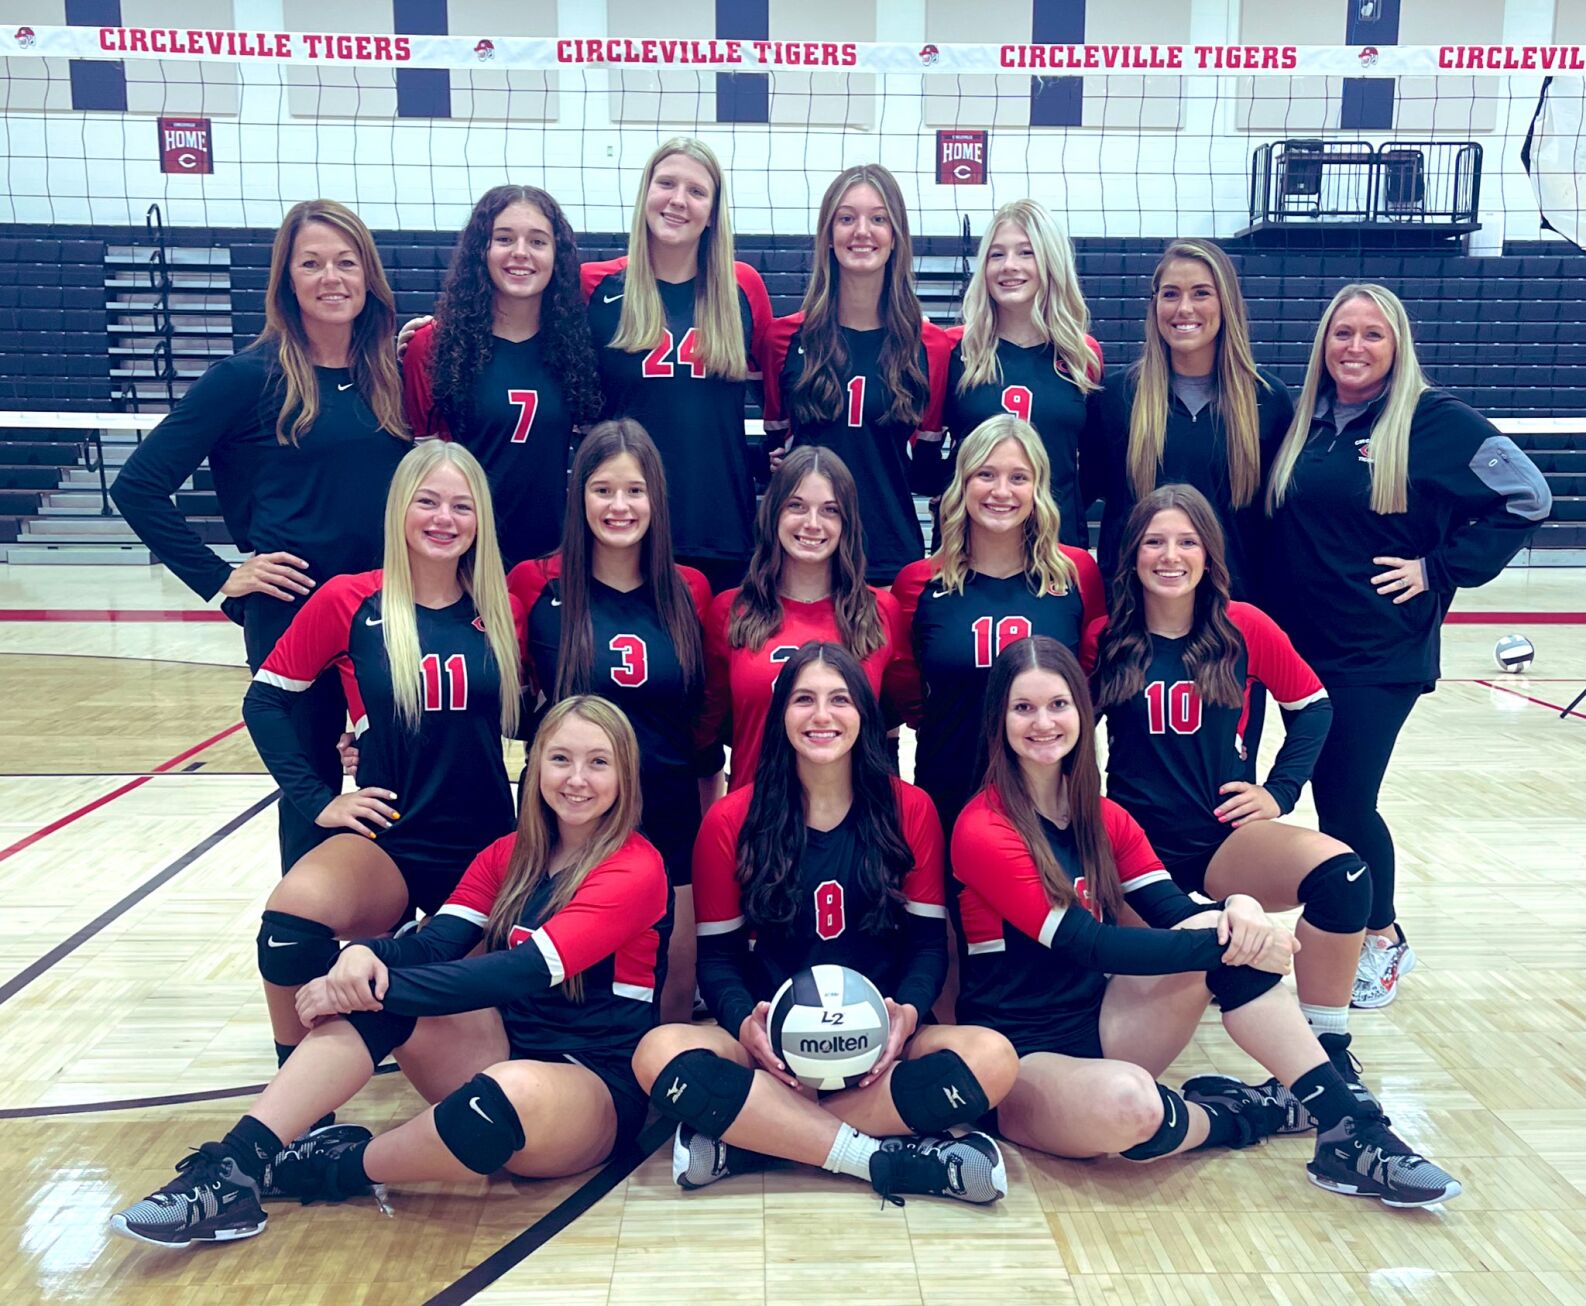 Circleville remains ranked 13th in new volleyball poll